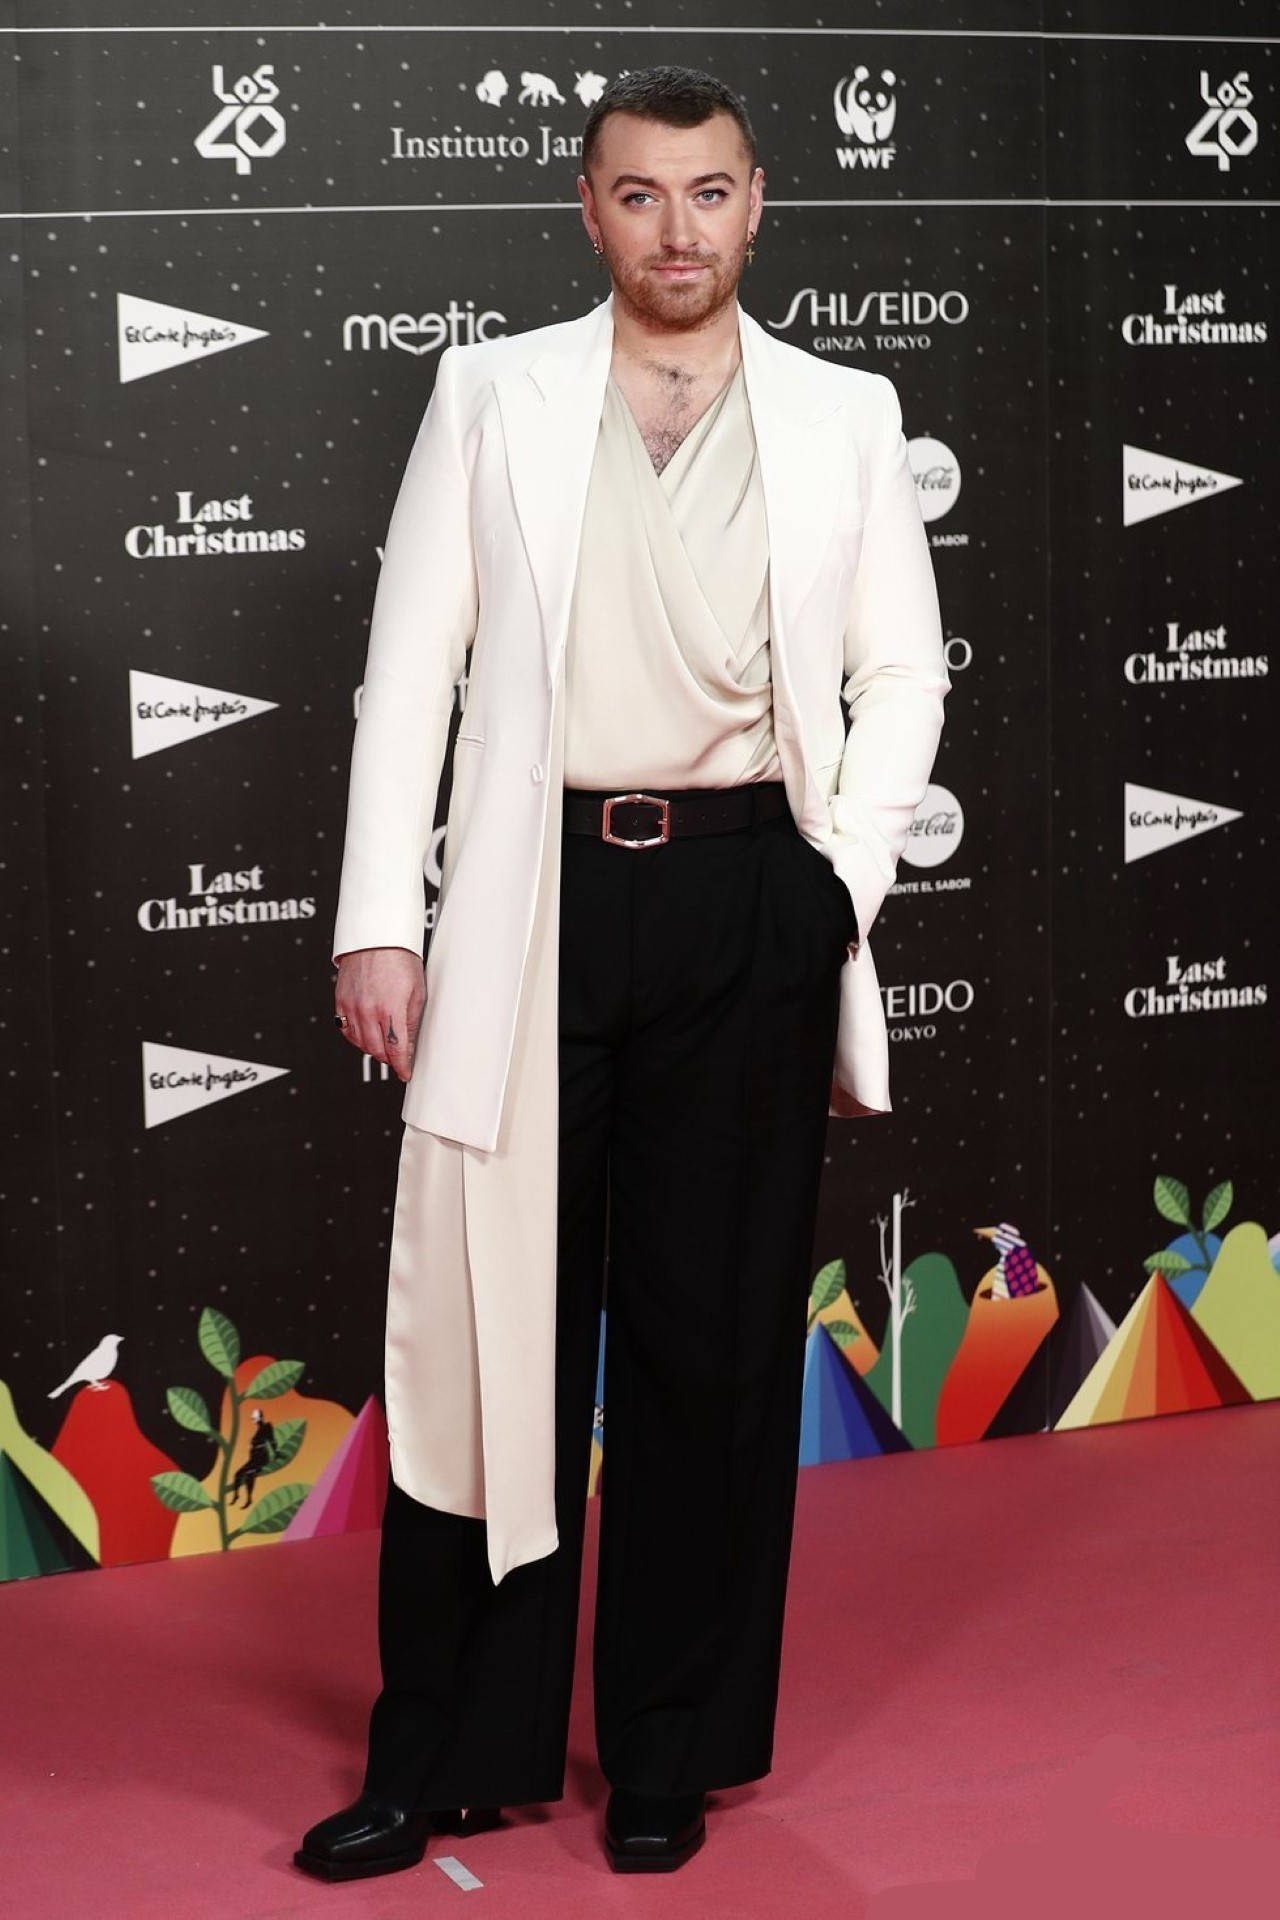 Sam Smith In Los40 Music Awards Background